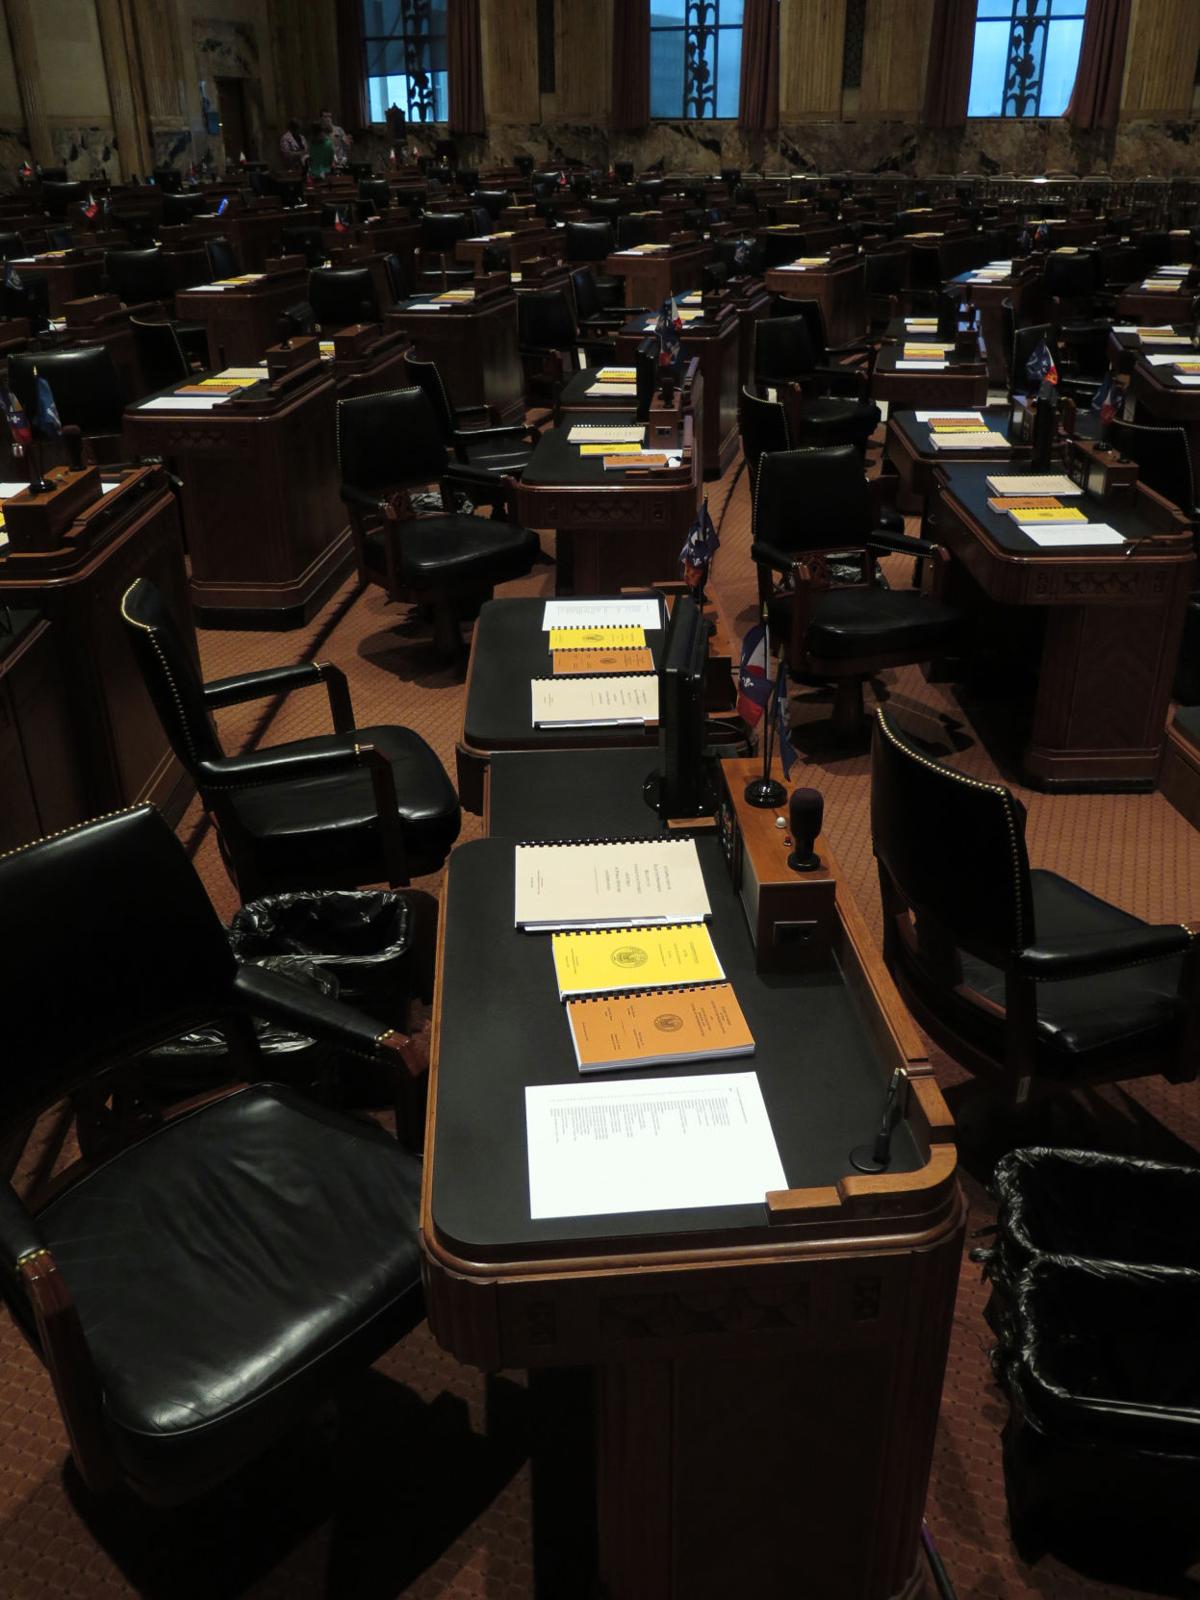 Louisiana Lawmakers Have Full Agenda Awaiting When Session Starts